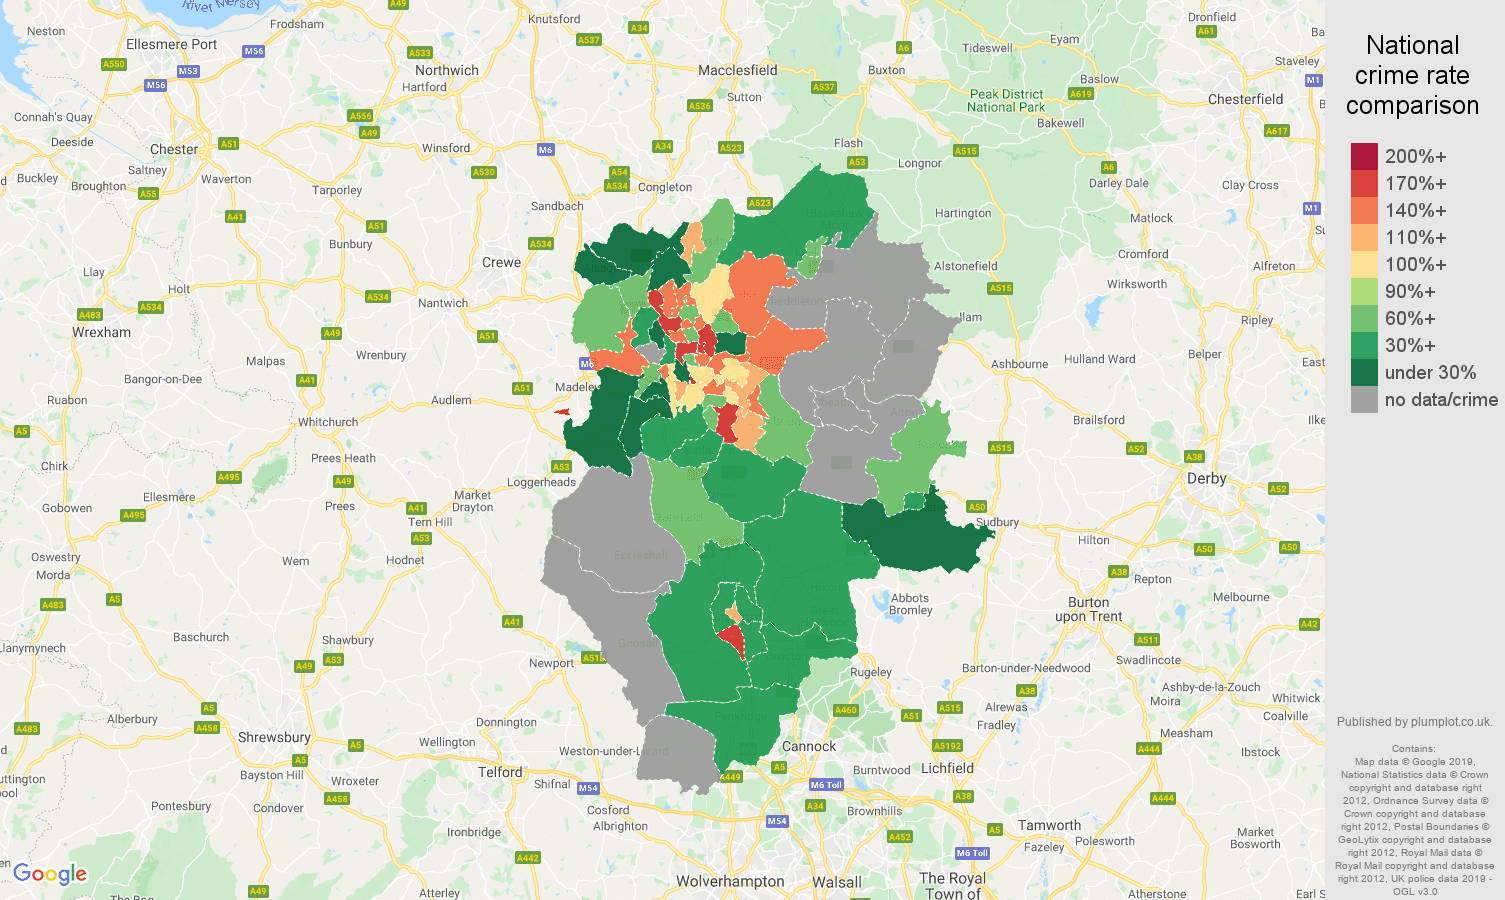 Stoke on Trent possession of weapons crime rate comparison map